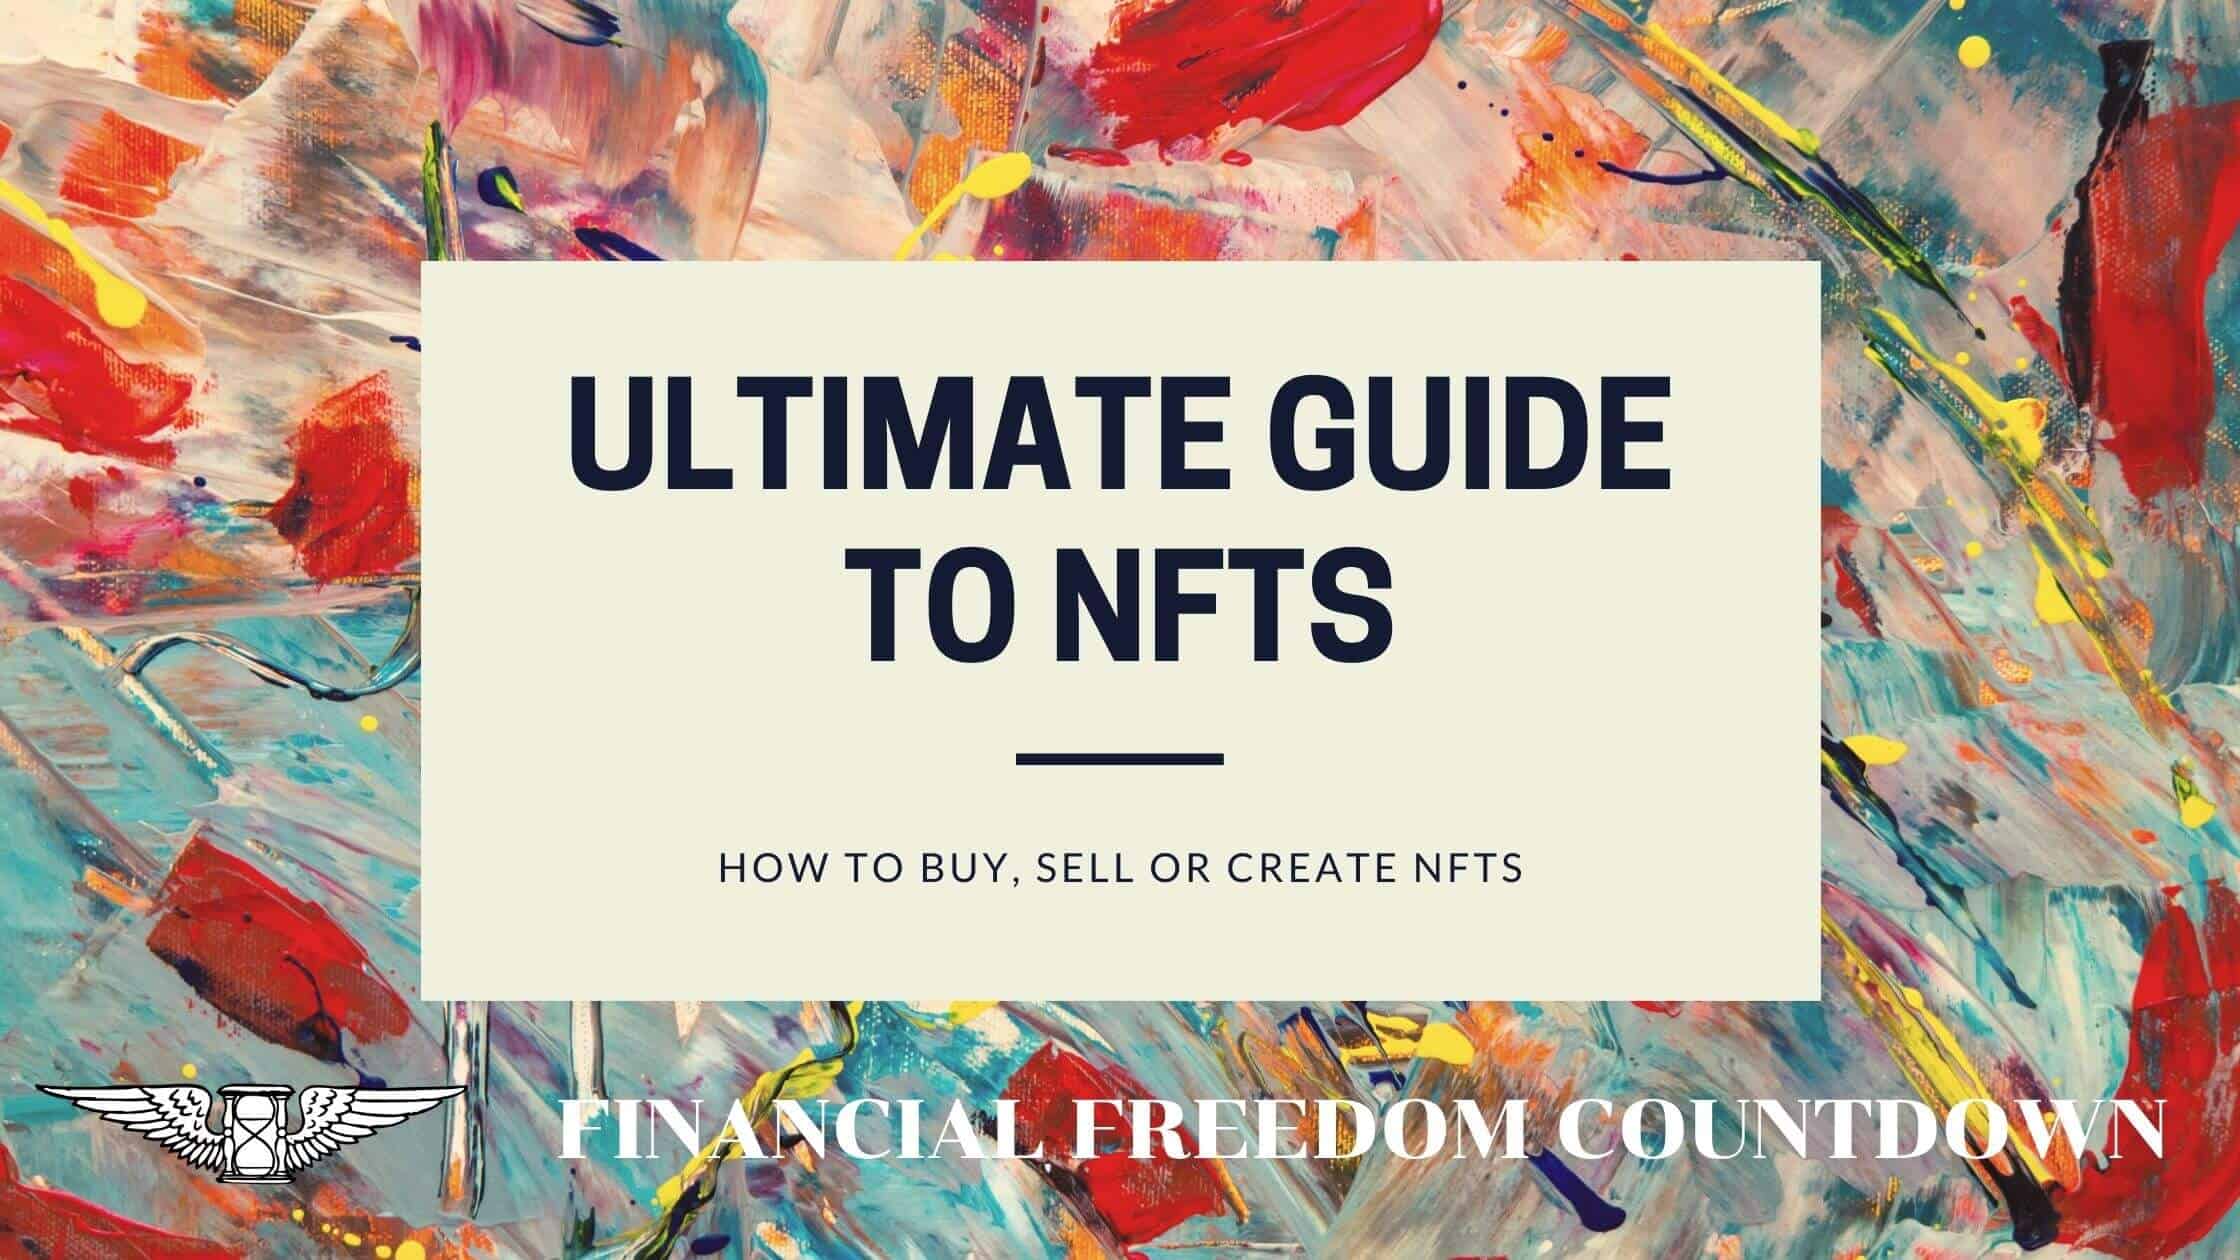 Ultimate Guide to NFTs or nonfungible tokens